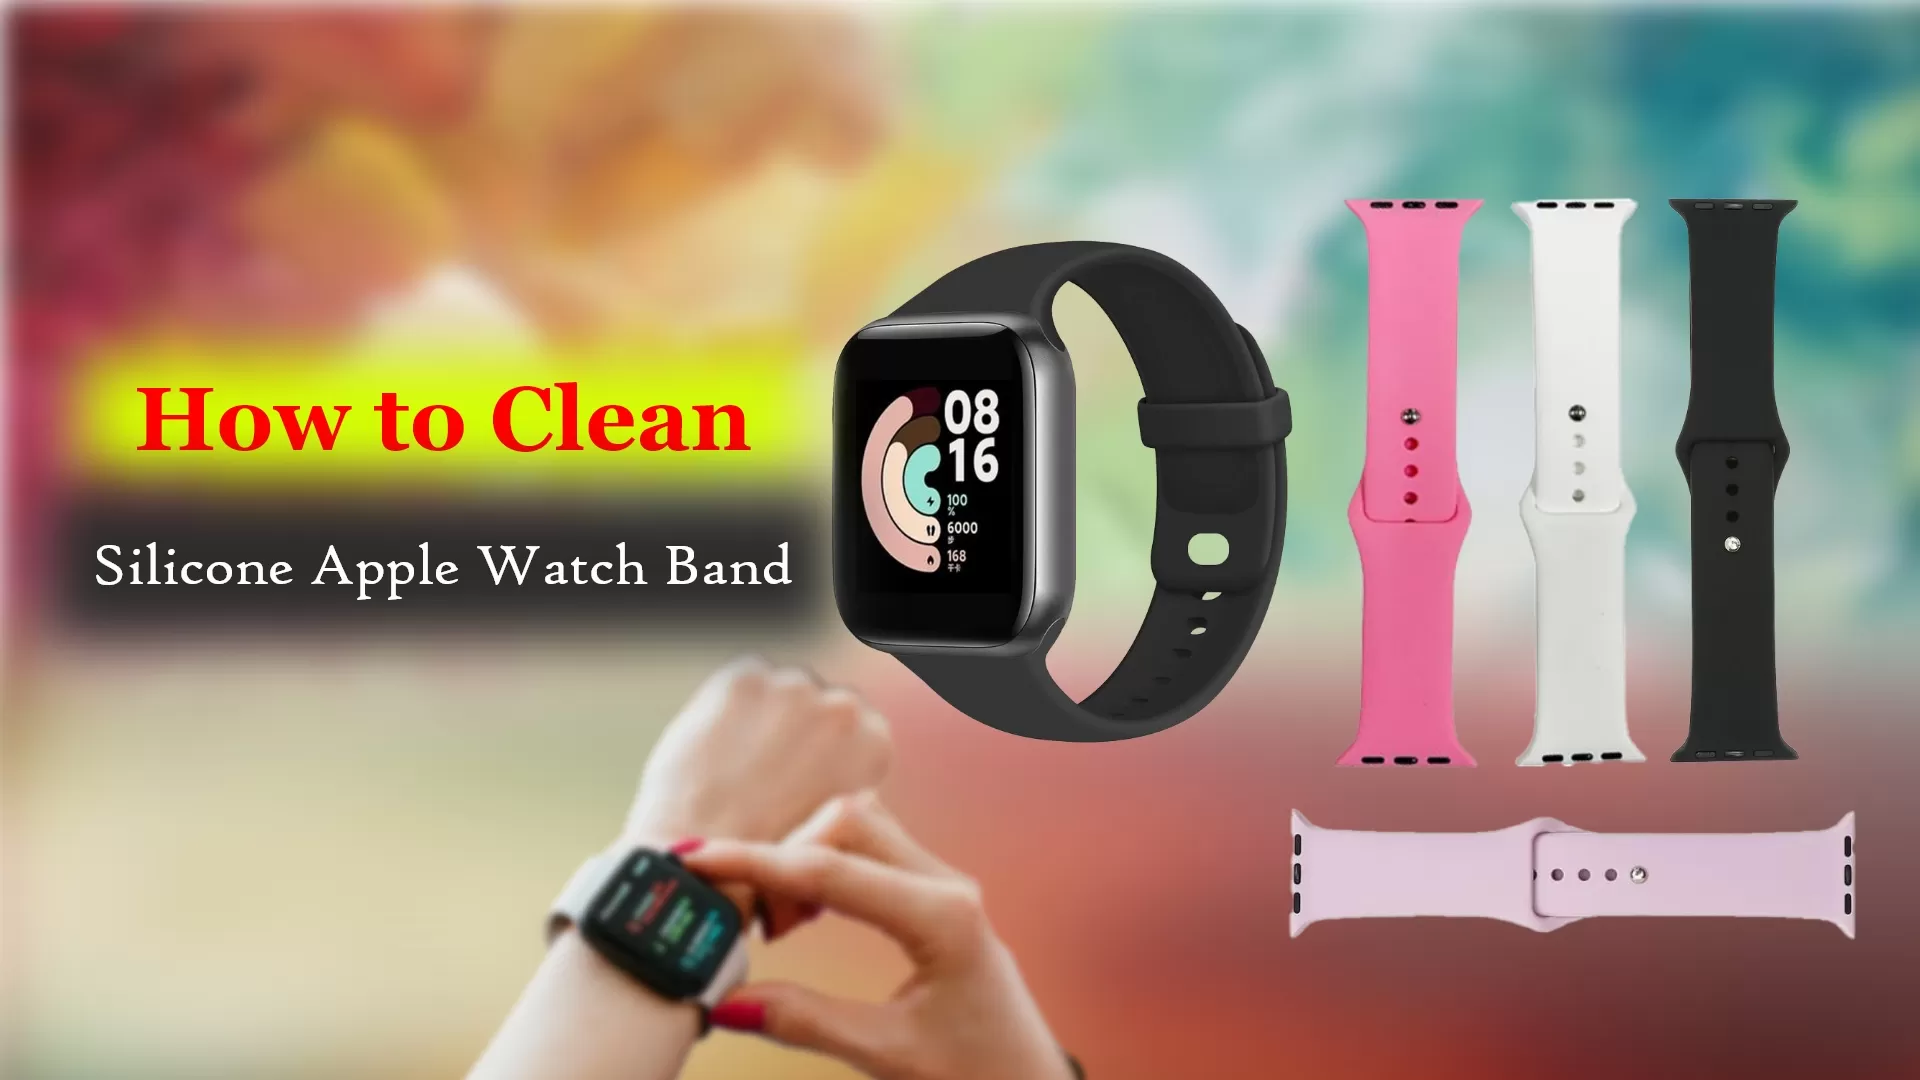 How to Clean Silicone Apple Watch Band